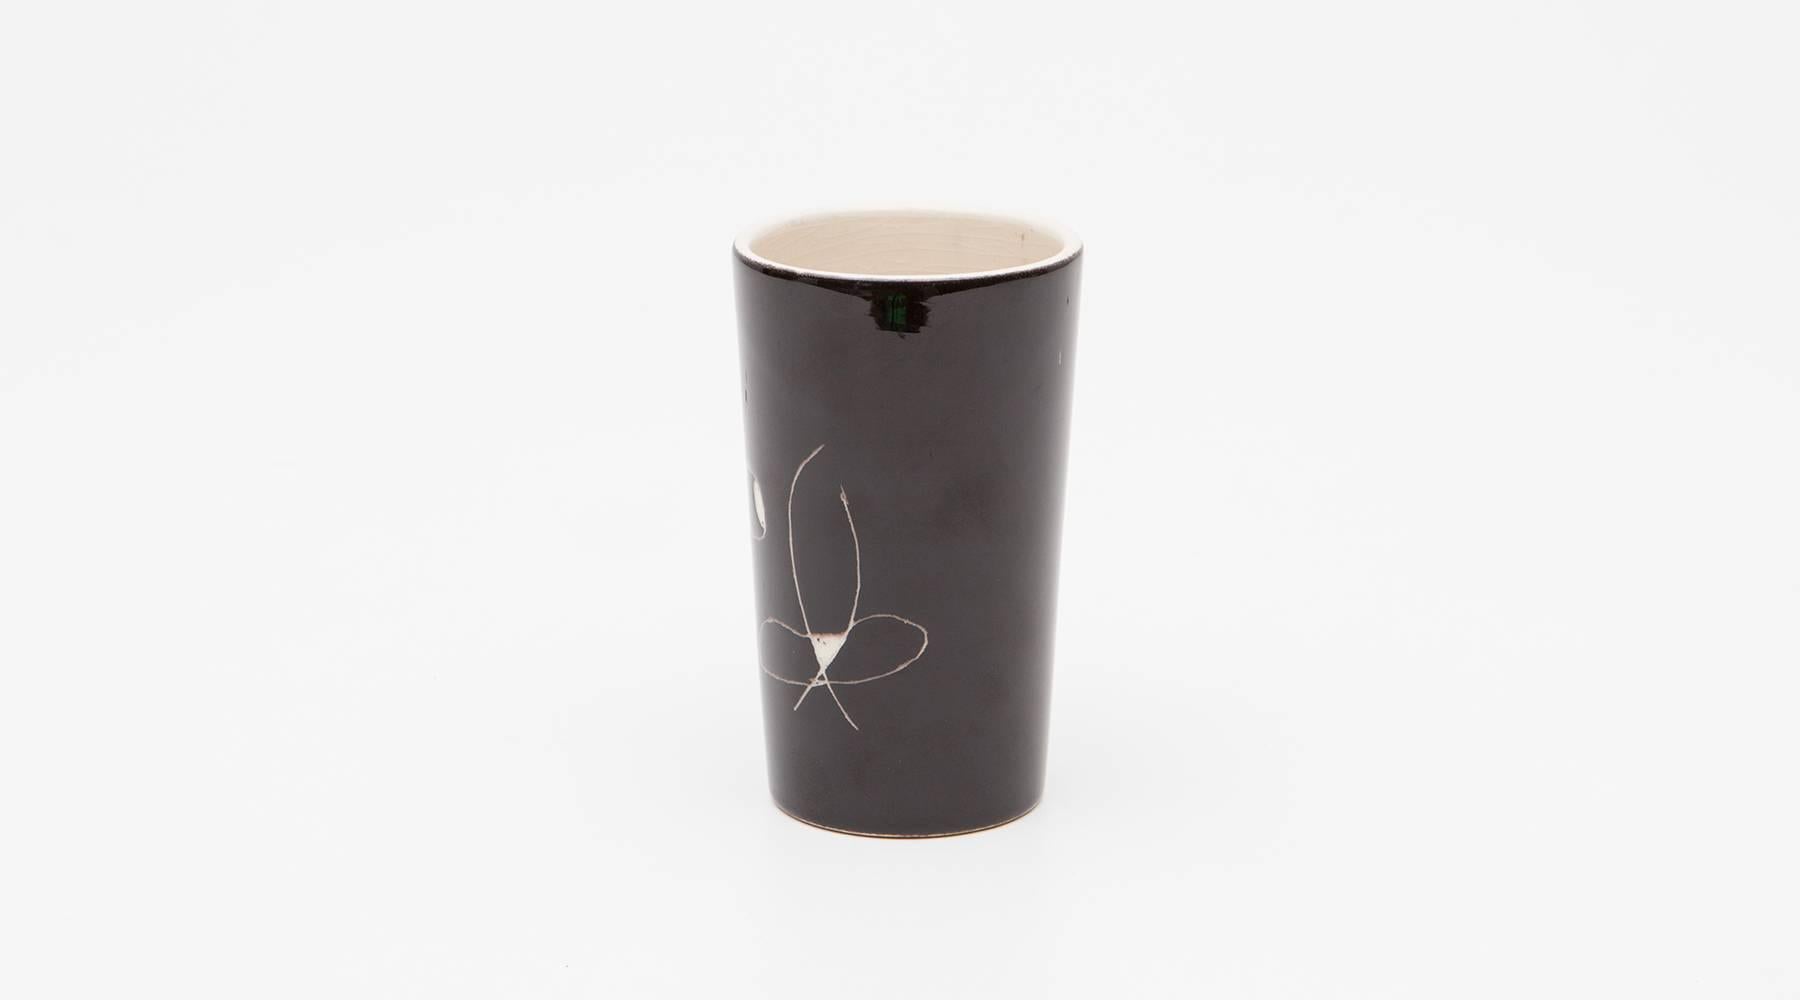 Black and white ceramic Cup by famous Joan Miró. Miró was a Spanish painter, sculptor, and ceramicist born 1893 in Barcelona. Earning international acclaim, his work has been interpreted as Surrealism, a sandbox for the unconscious mind, a